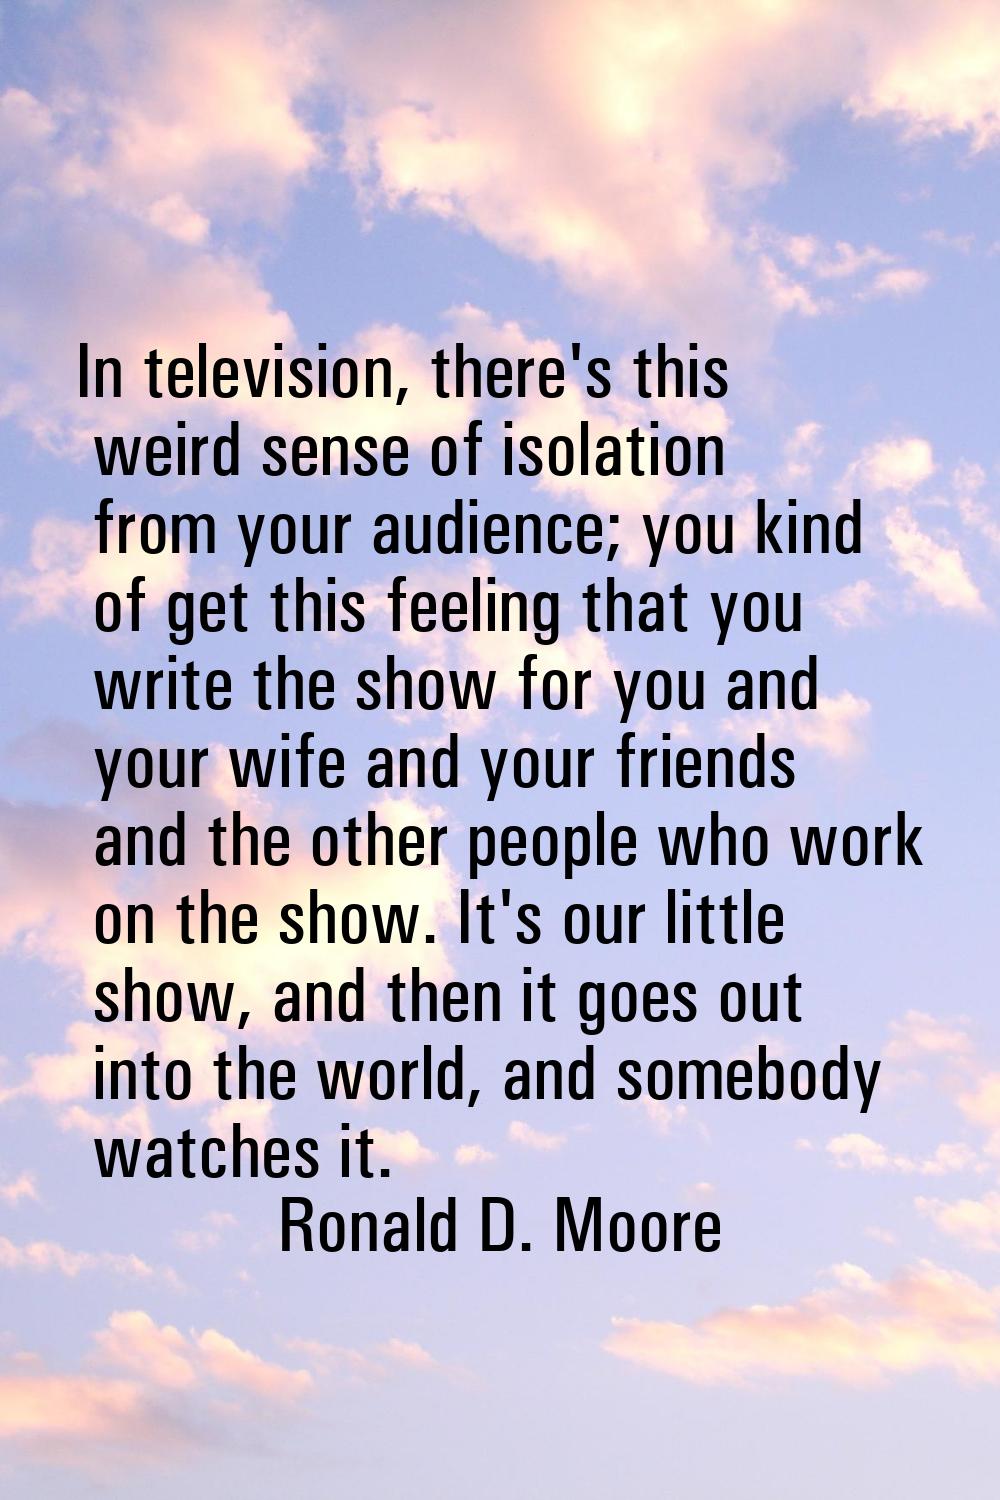 In television, there's this weird sense of isolation from your audience; you kind of get this feeli